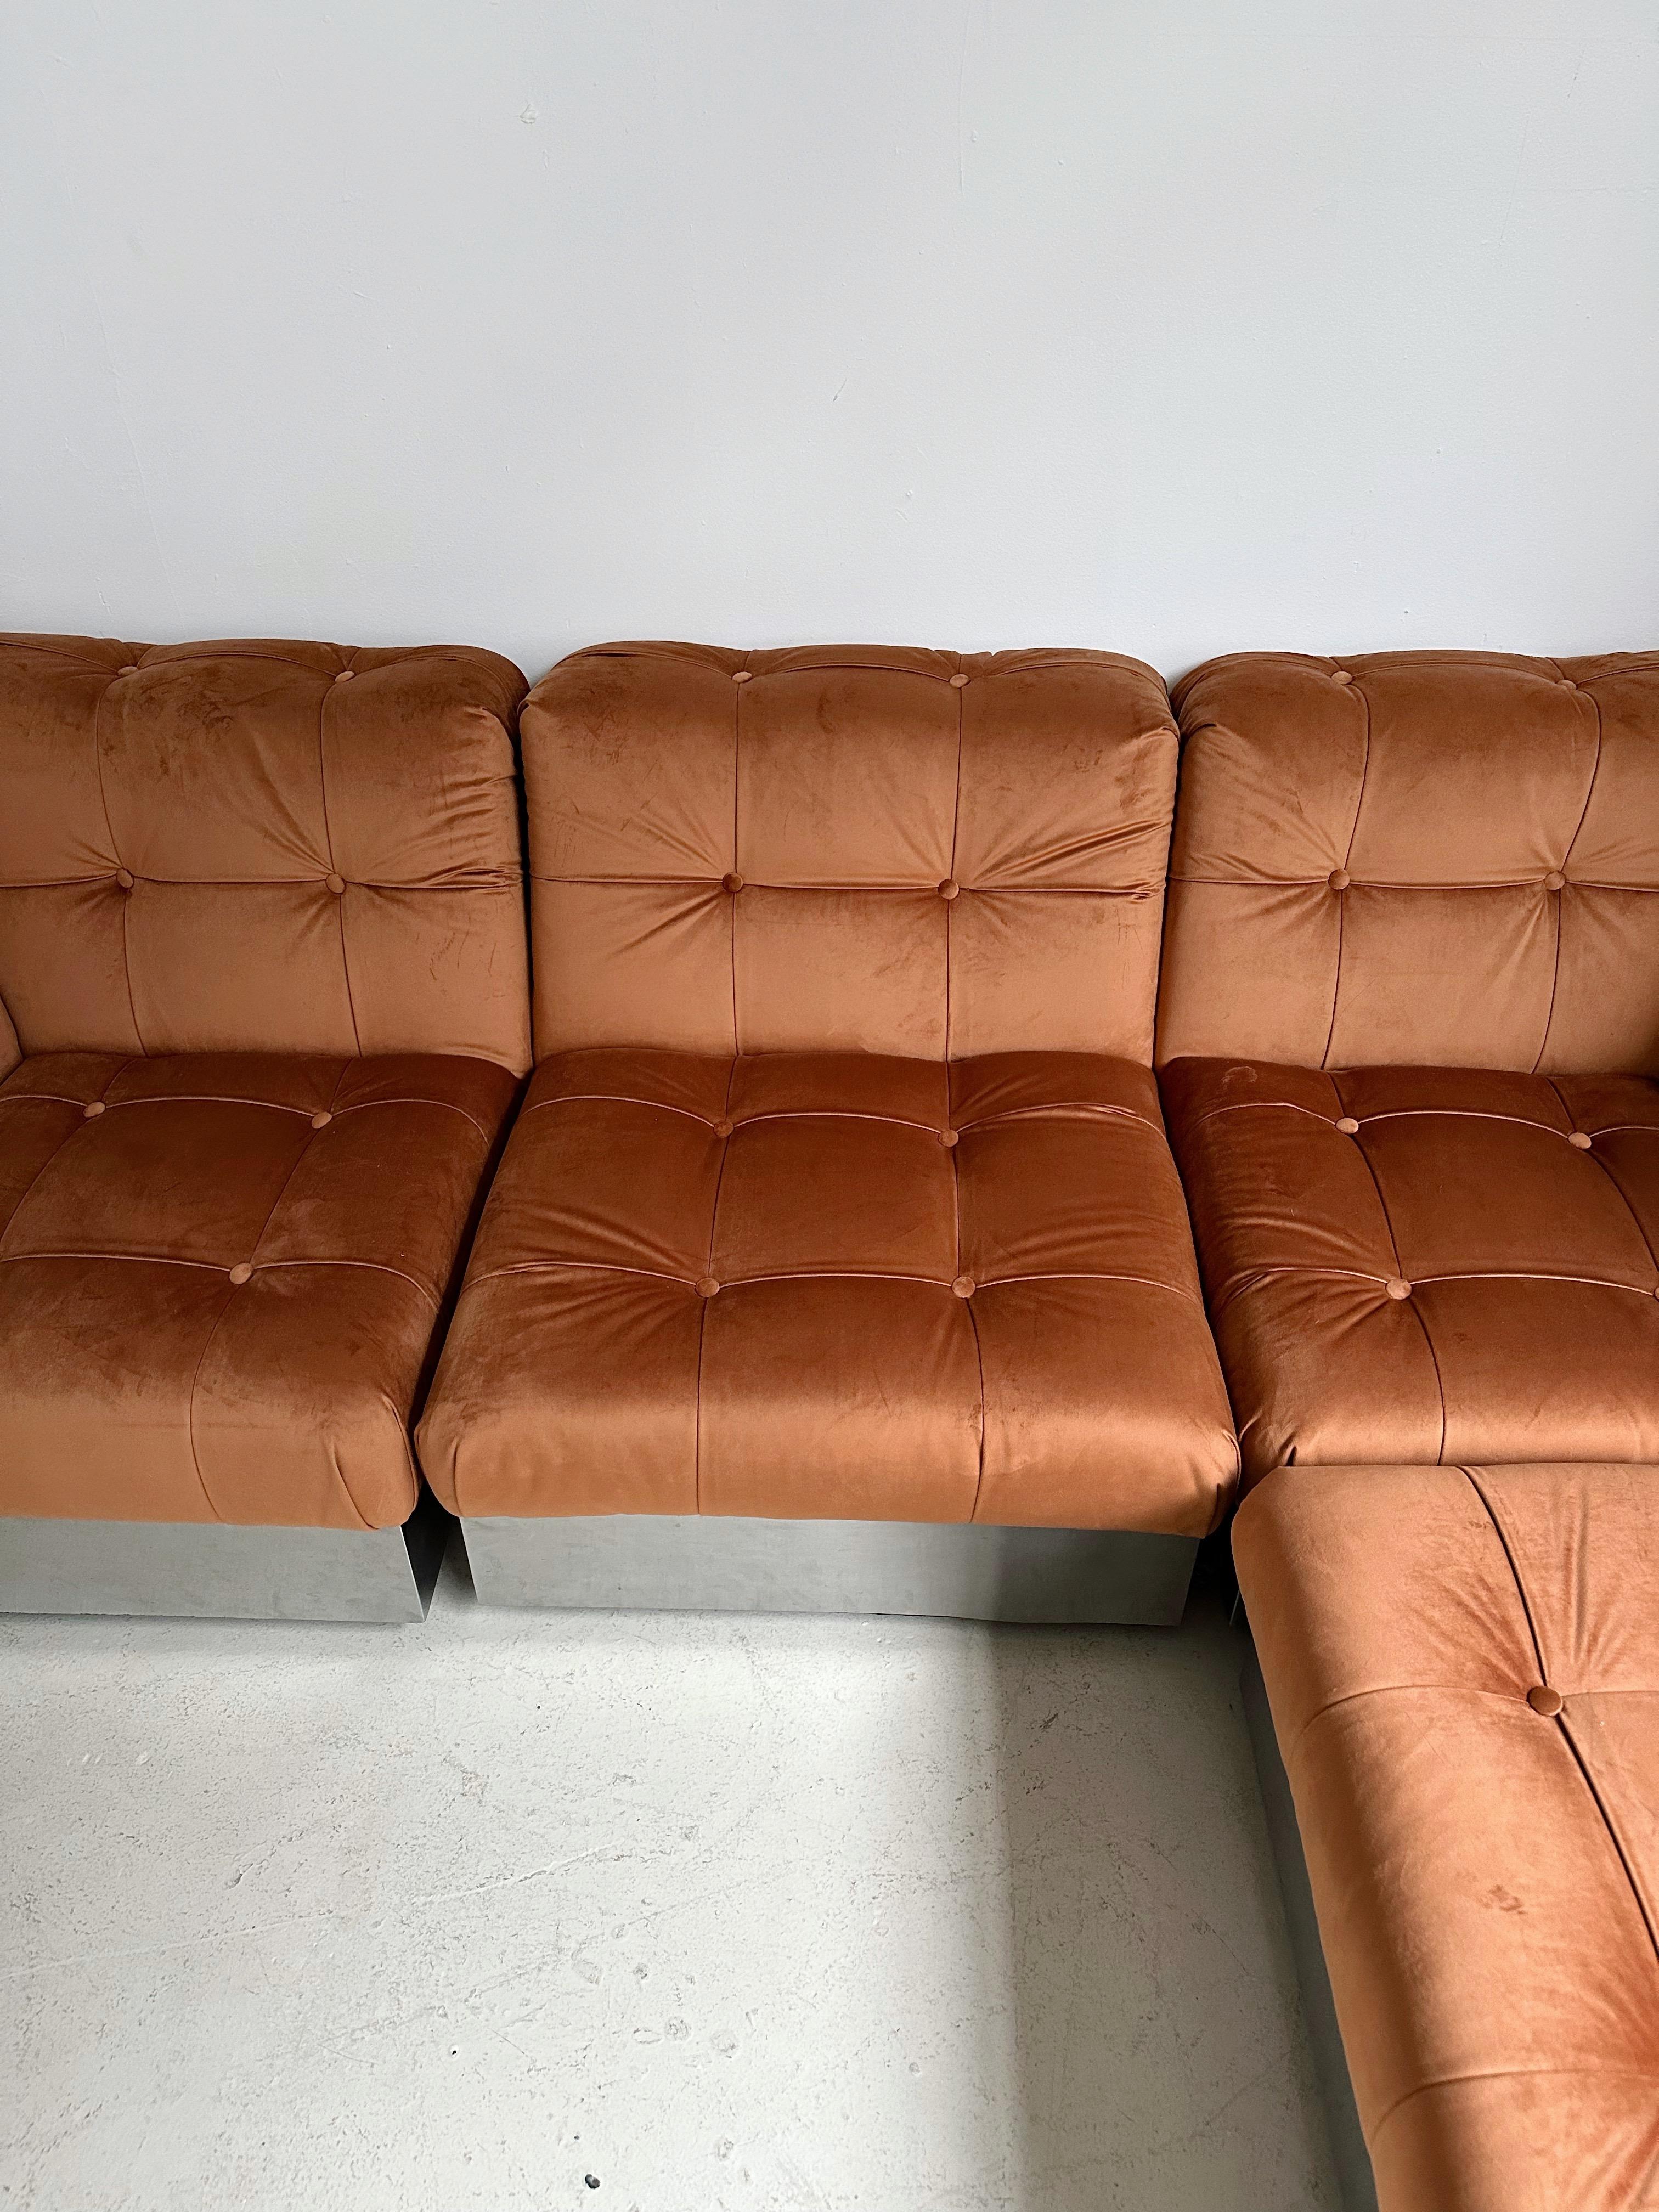 Velvet & Steel Base 4 Piece Modular Sofa att. to Canasta by Giorgio Montani In Good Condition For Sale In Outremont, QC